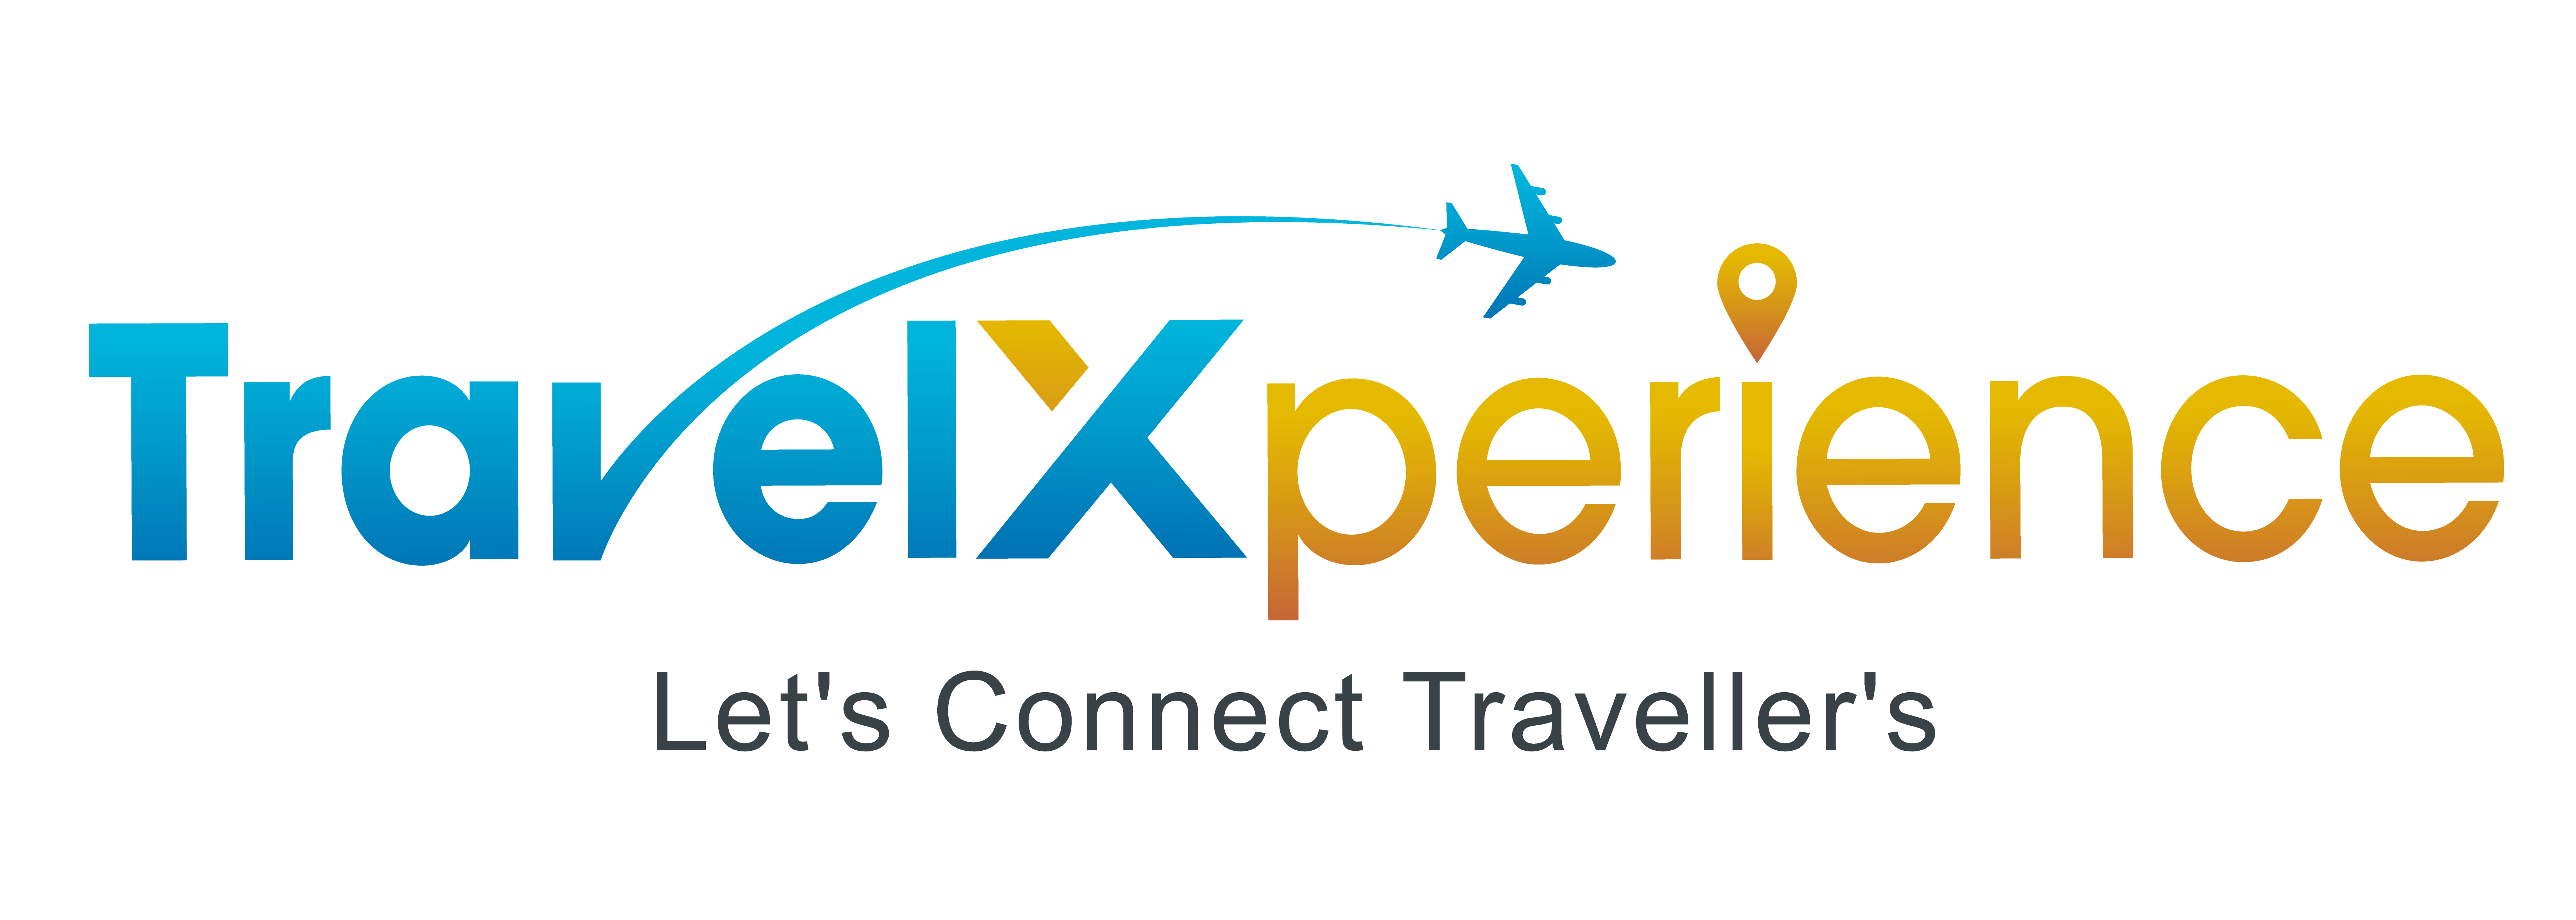 travel xperience